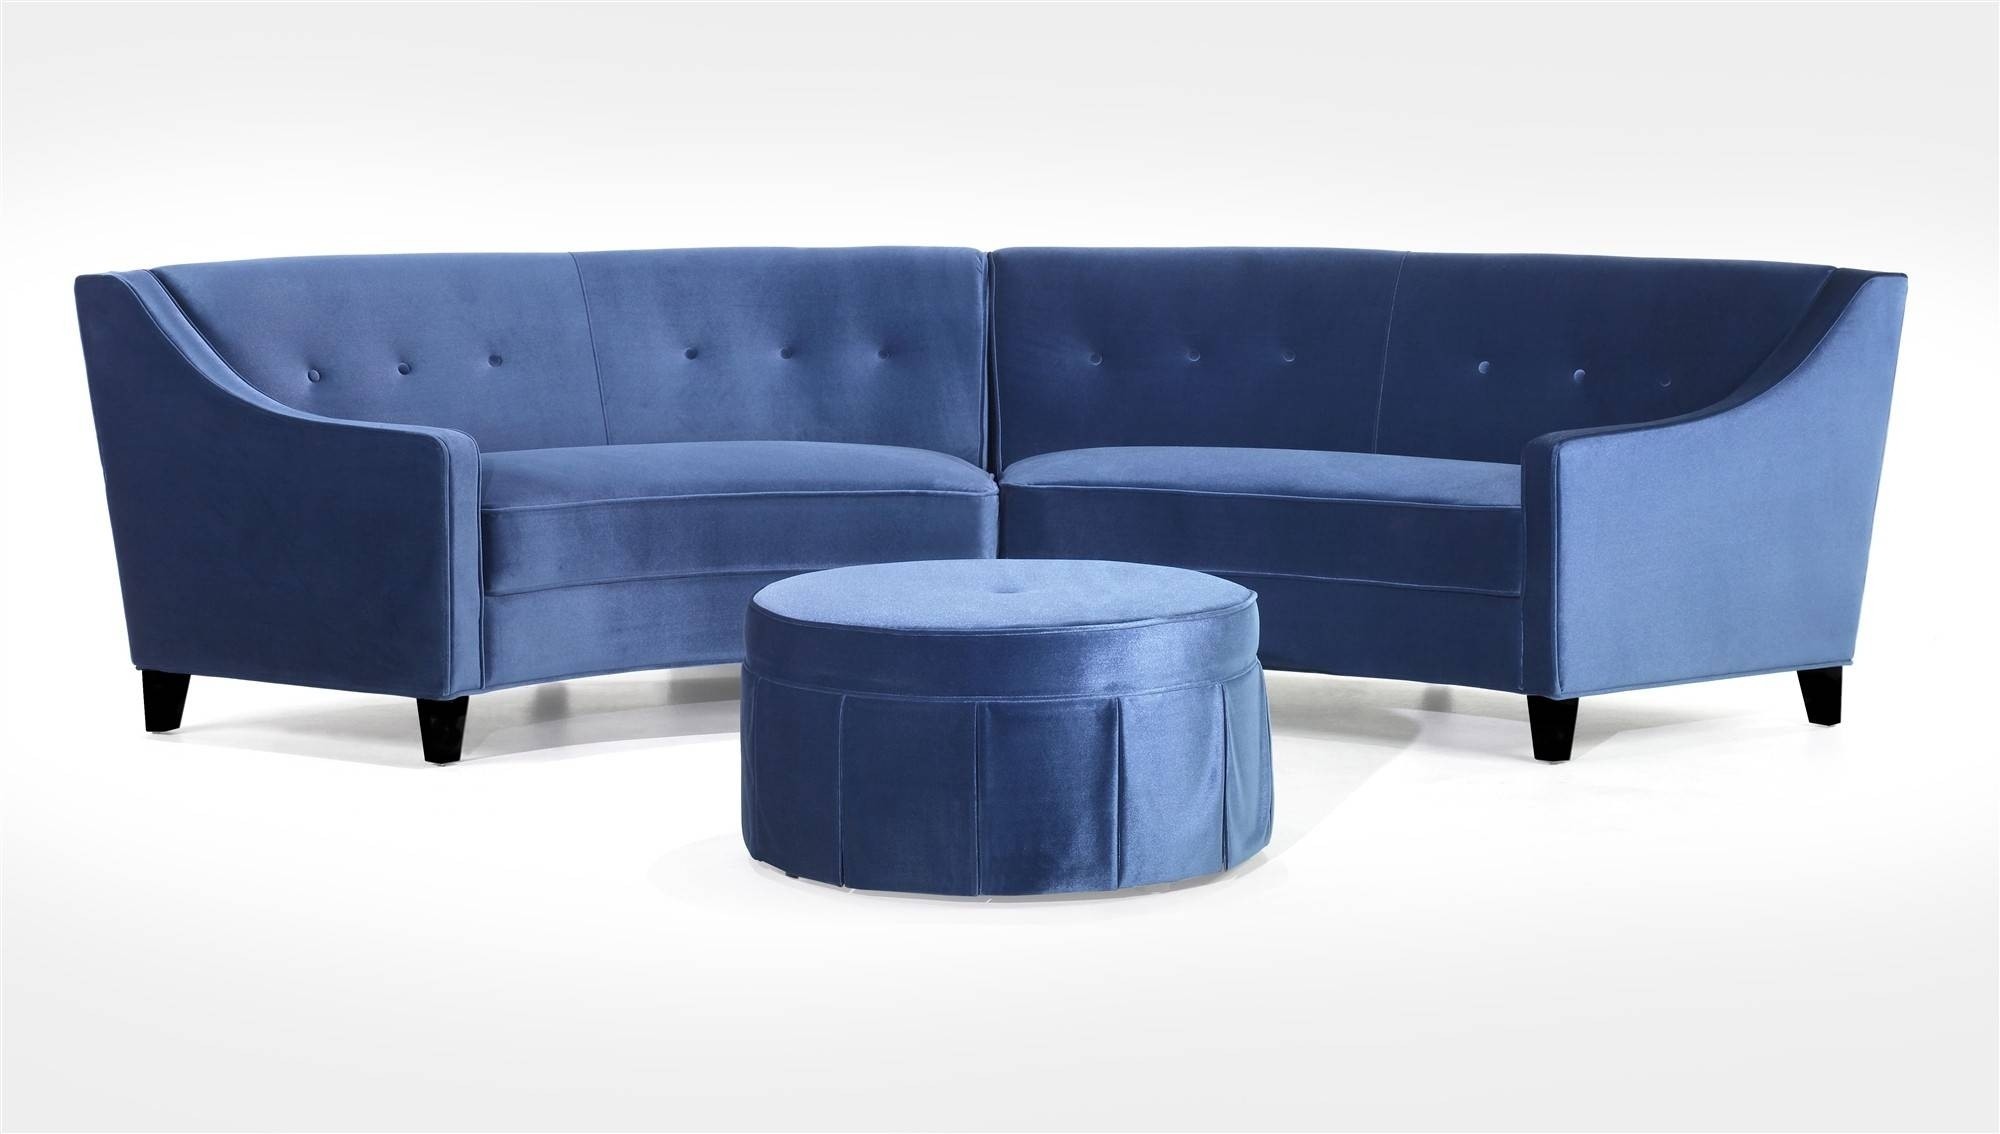 Decoration cool blue sofa for modern living room layouts decorating